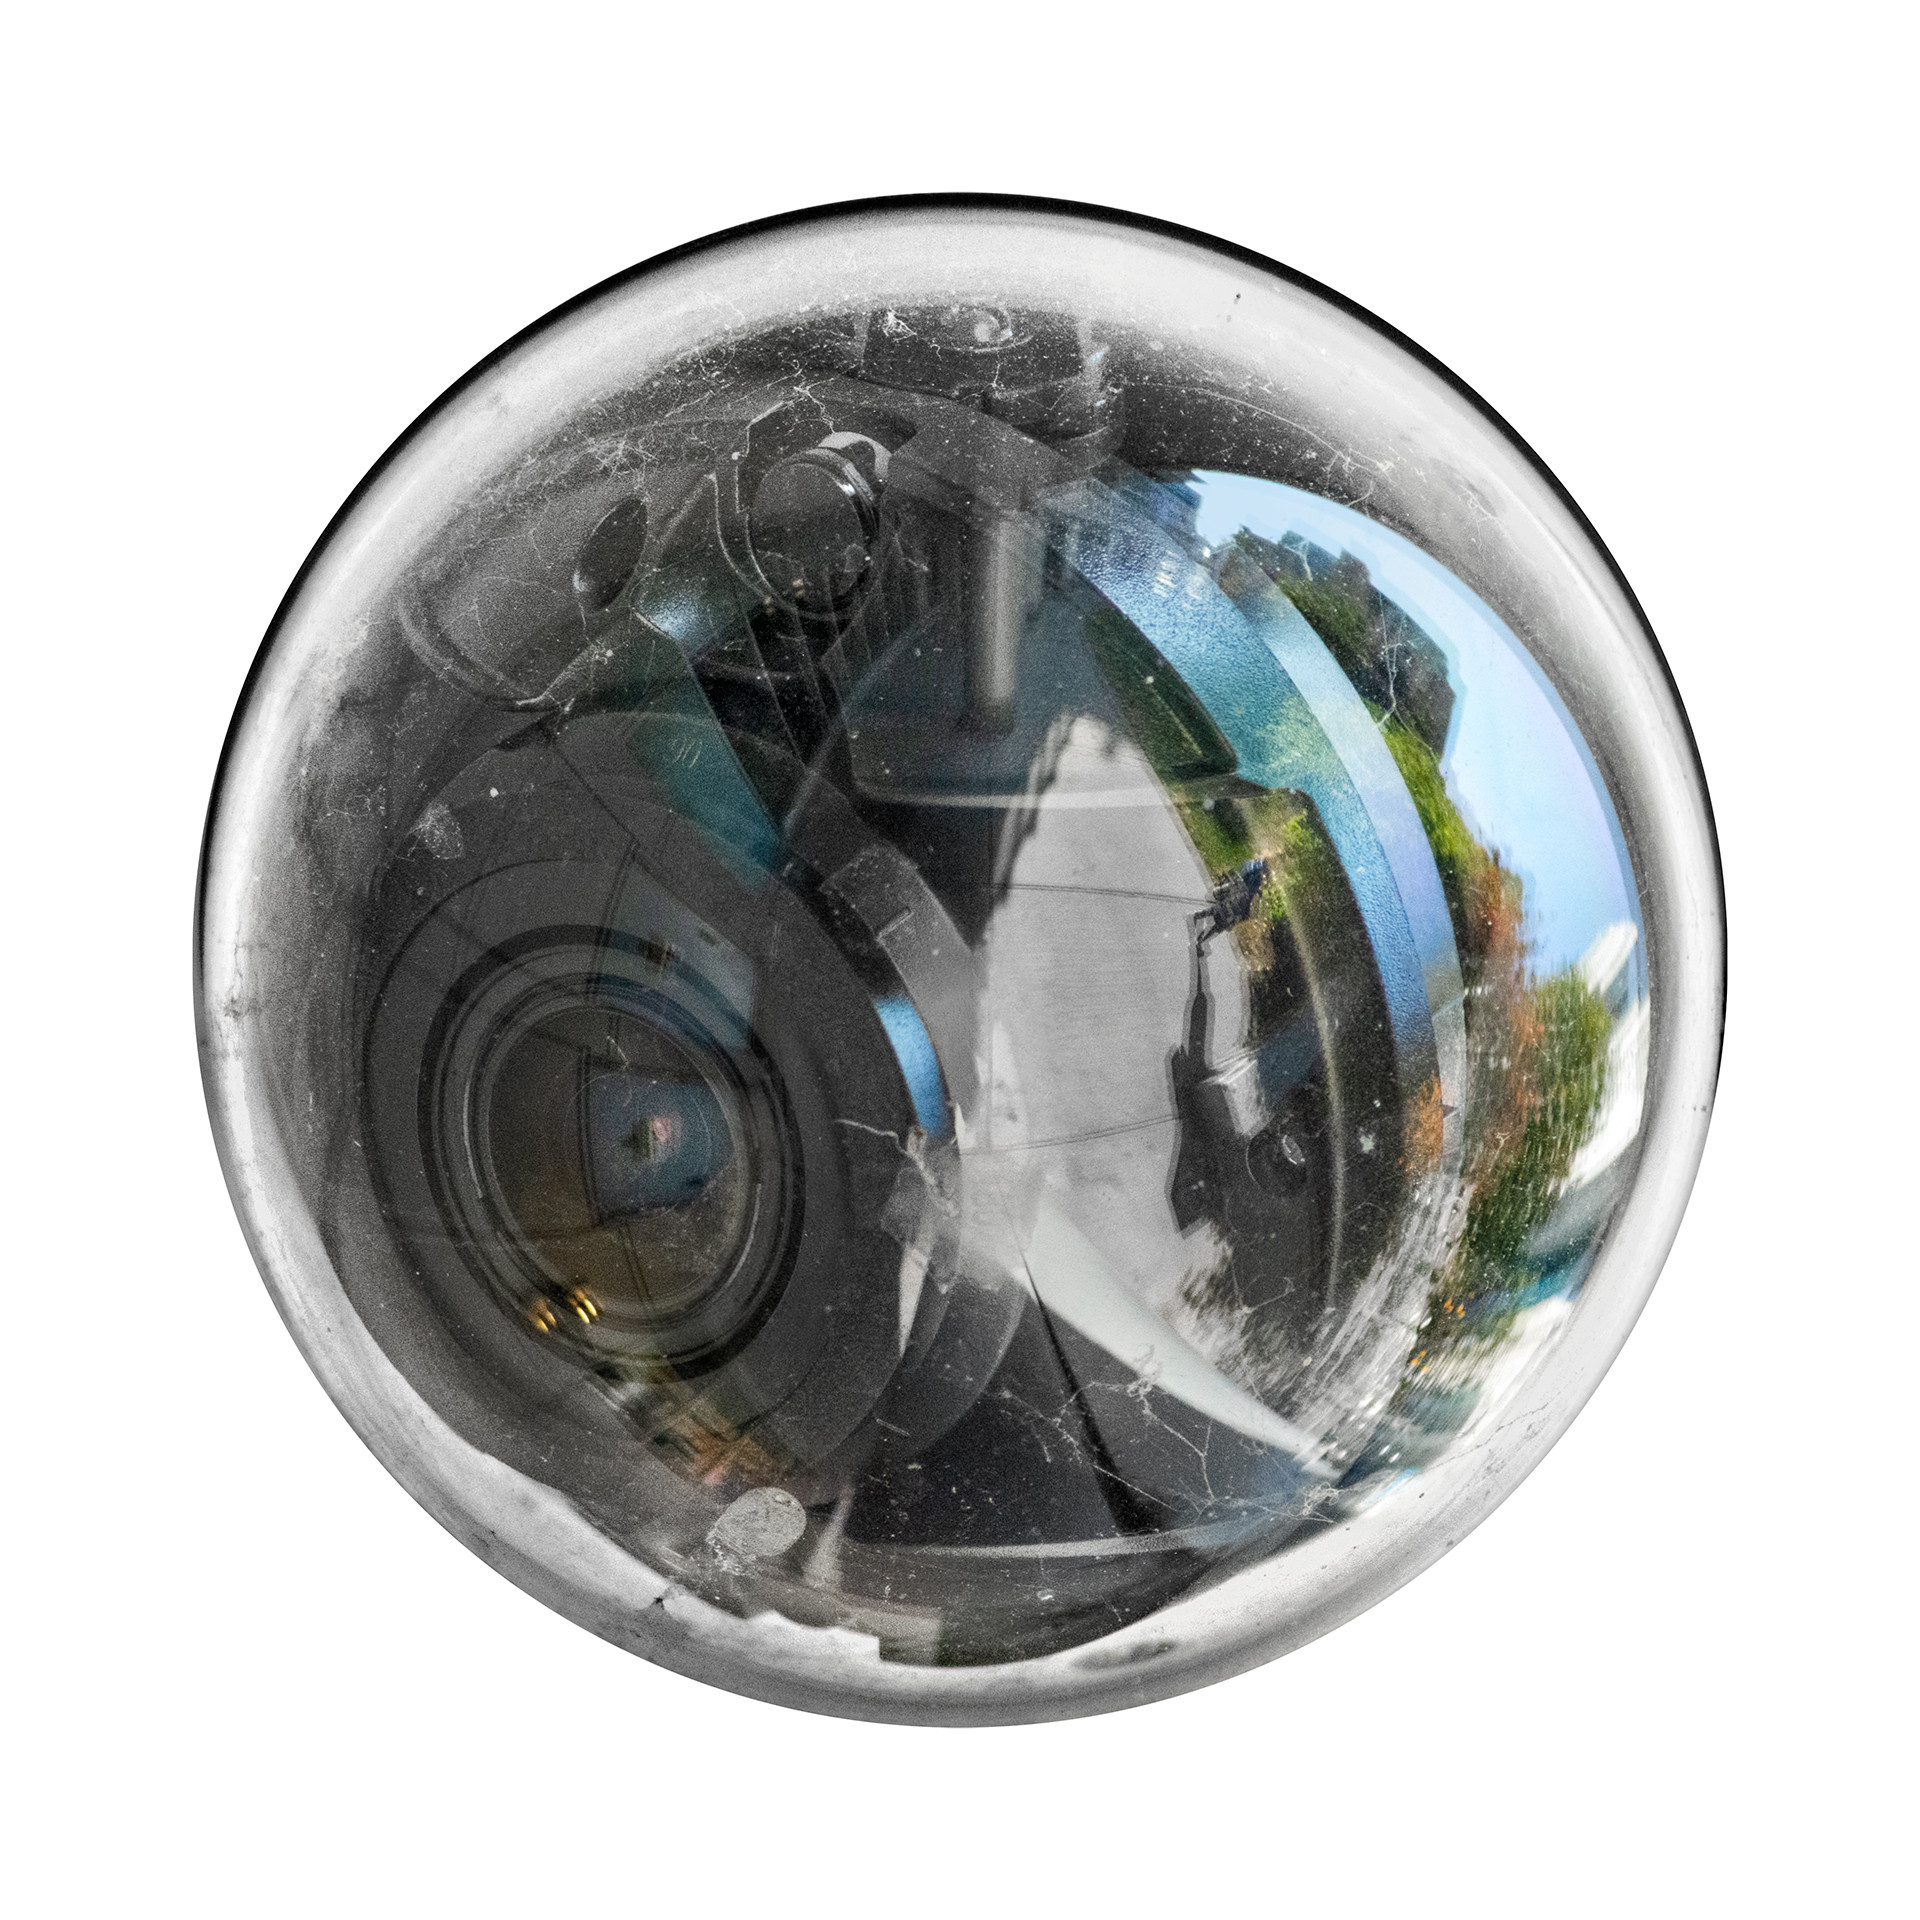 ): Distorted reflection of urban area and walkway in a circular security camera lens.